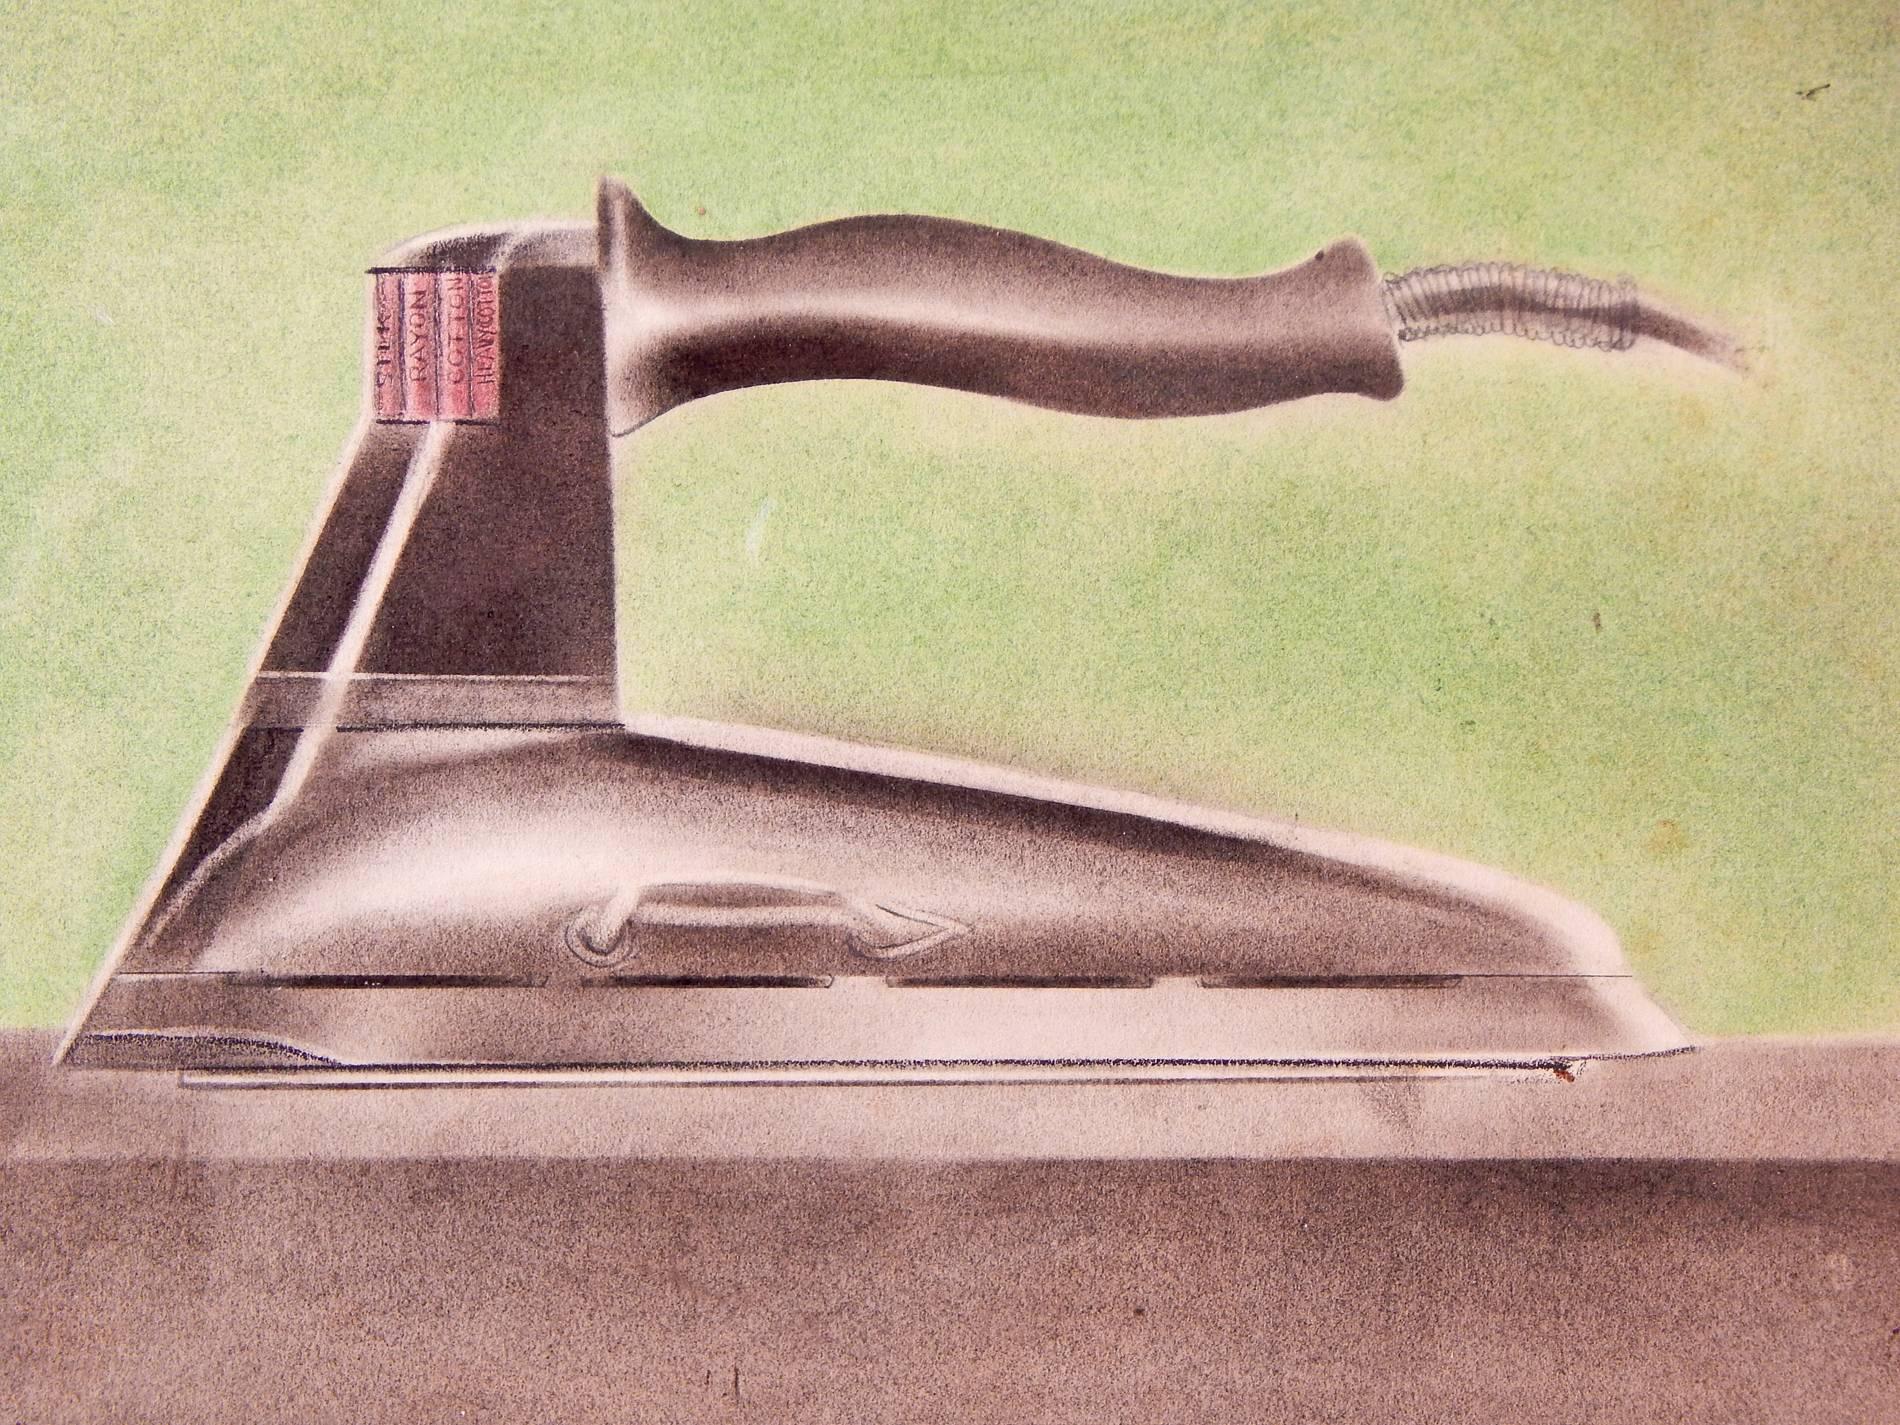 A Classic example of Moderne Industrial Design from the 1930s or 1940s which applied the sleek, streamlined forms of trains, ships and automobiles to everyday appliances, this drawing was created by Ernest Towers. Here the lowly steam iron has